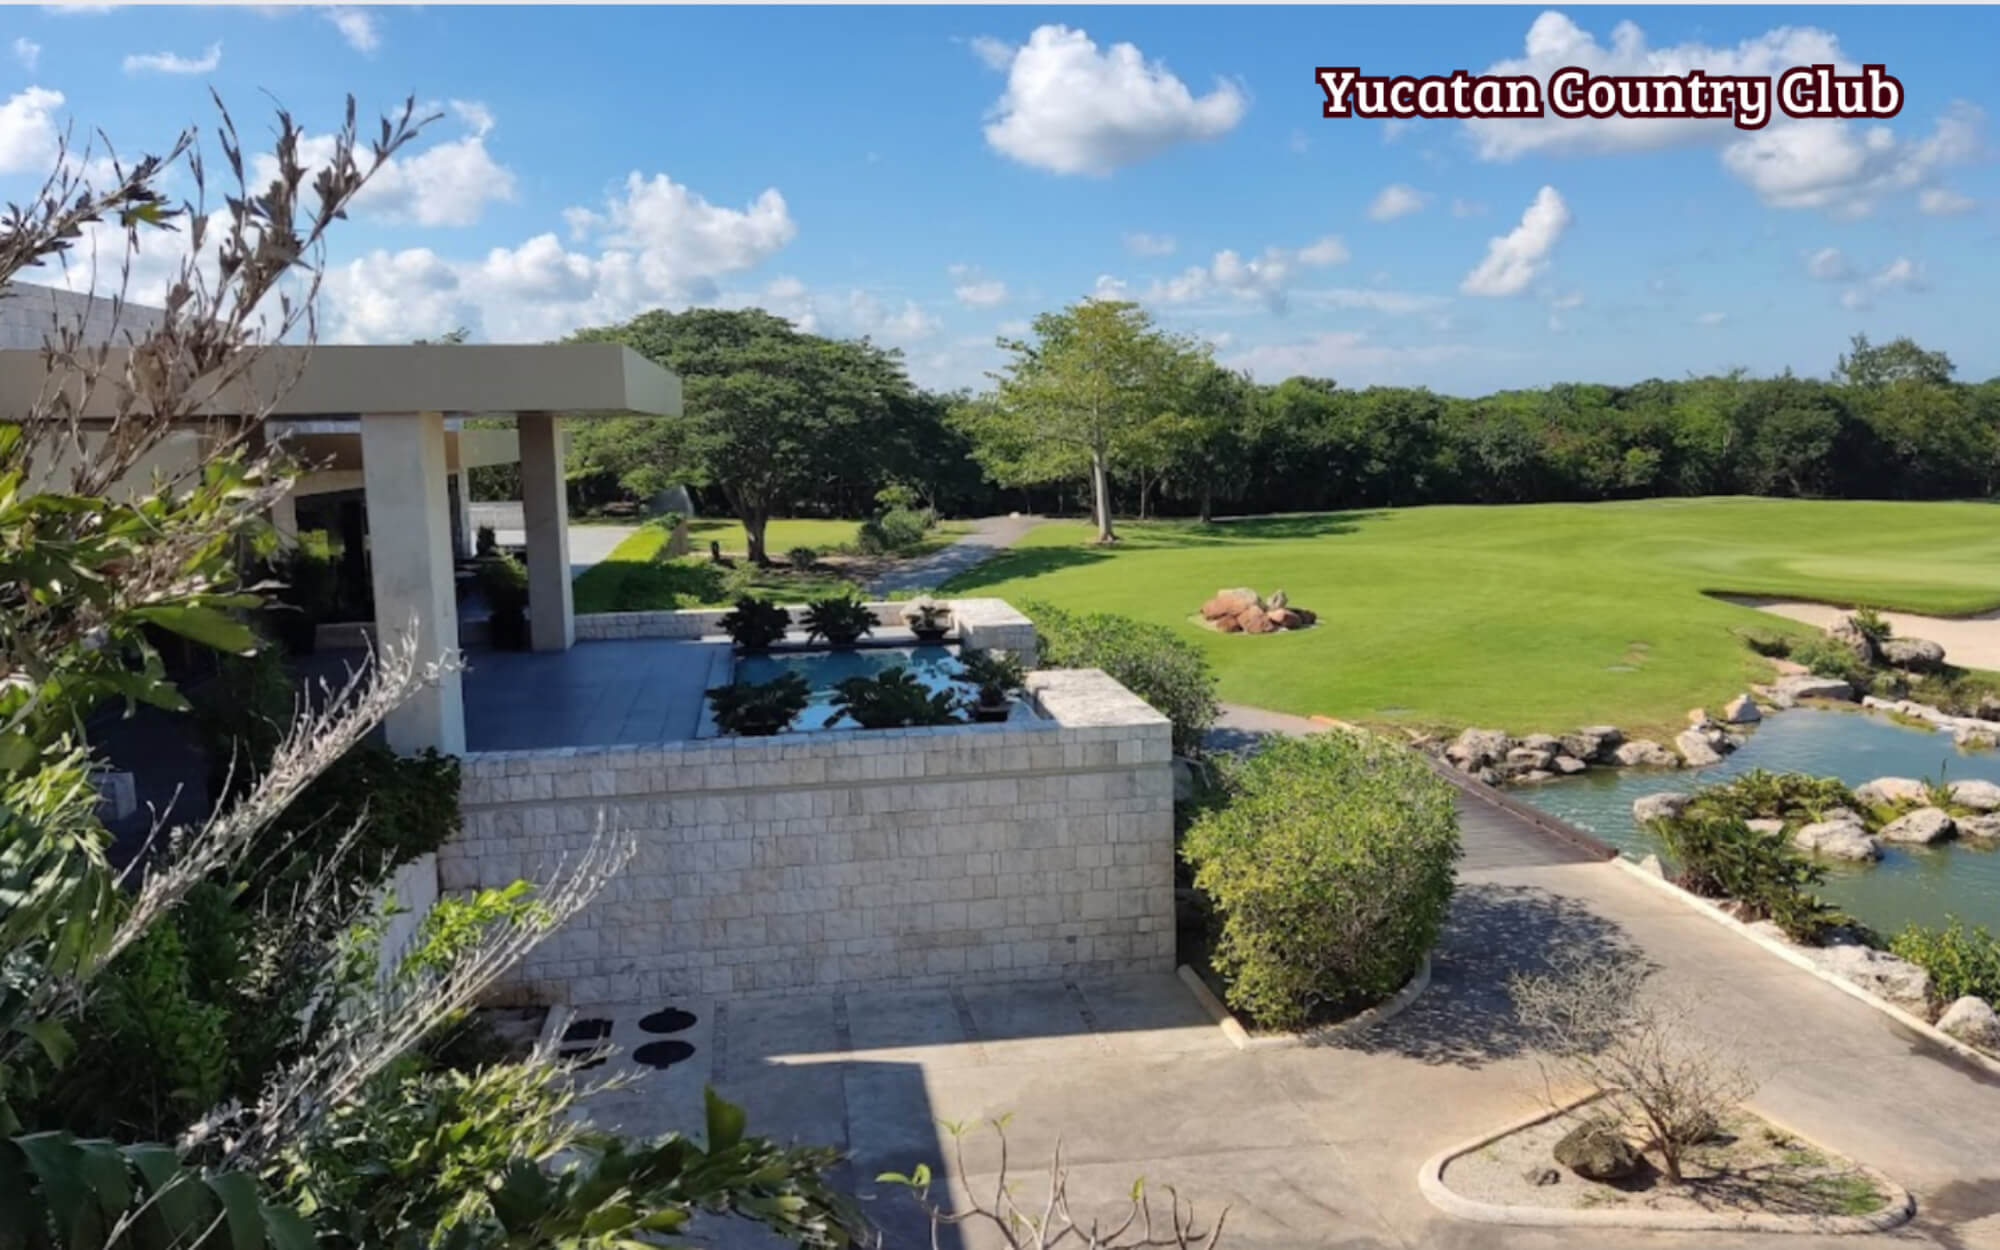 House on golf course, garden with private pool, club house and more amenities, in Yucatan Country Club, for sale Merida.